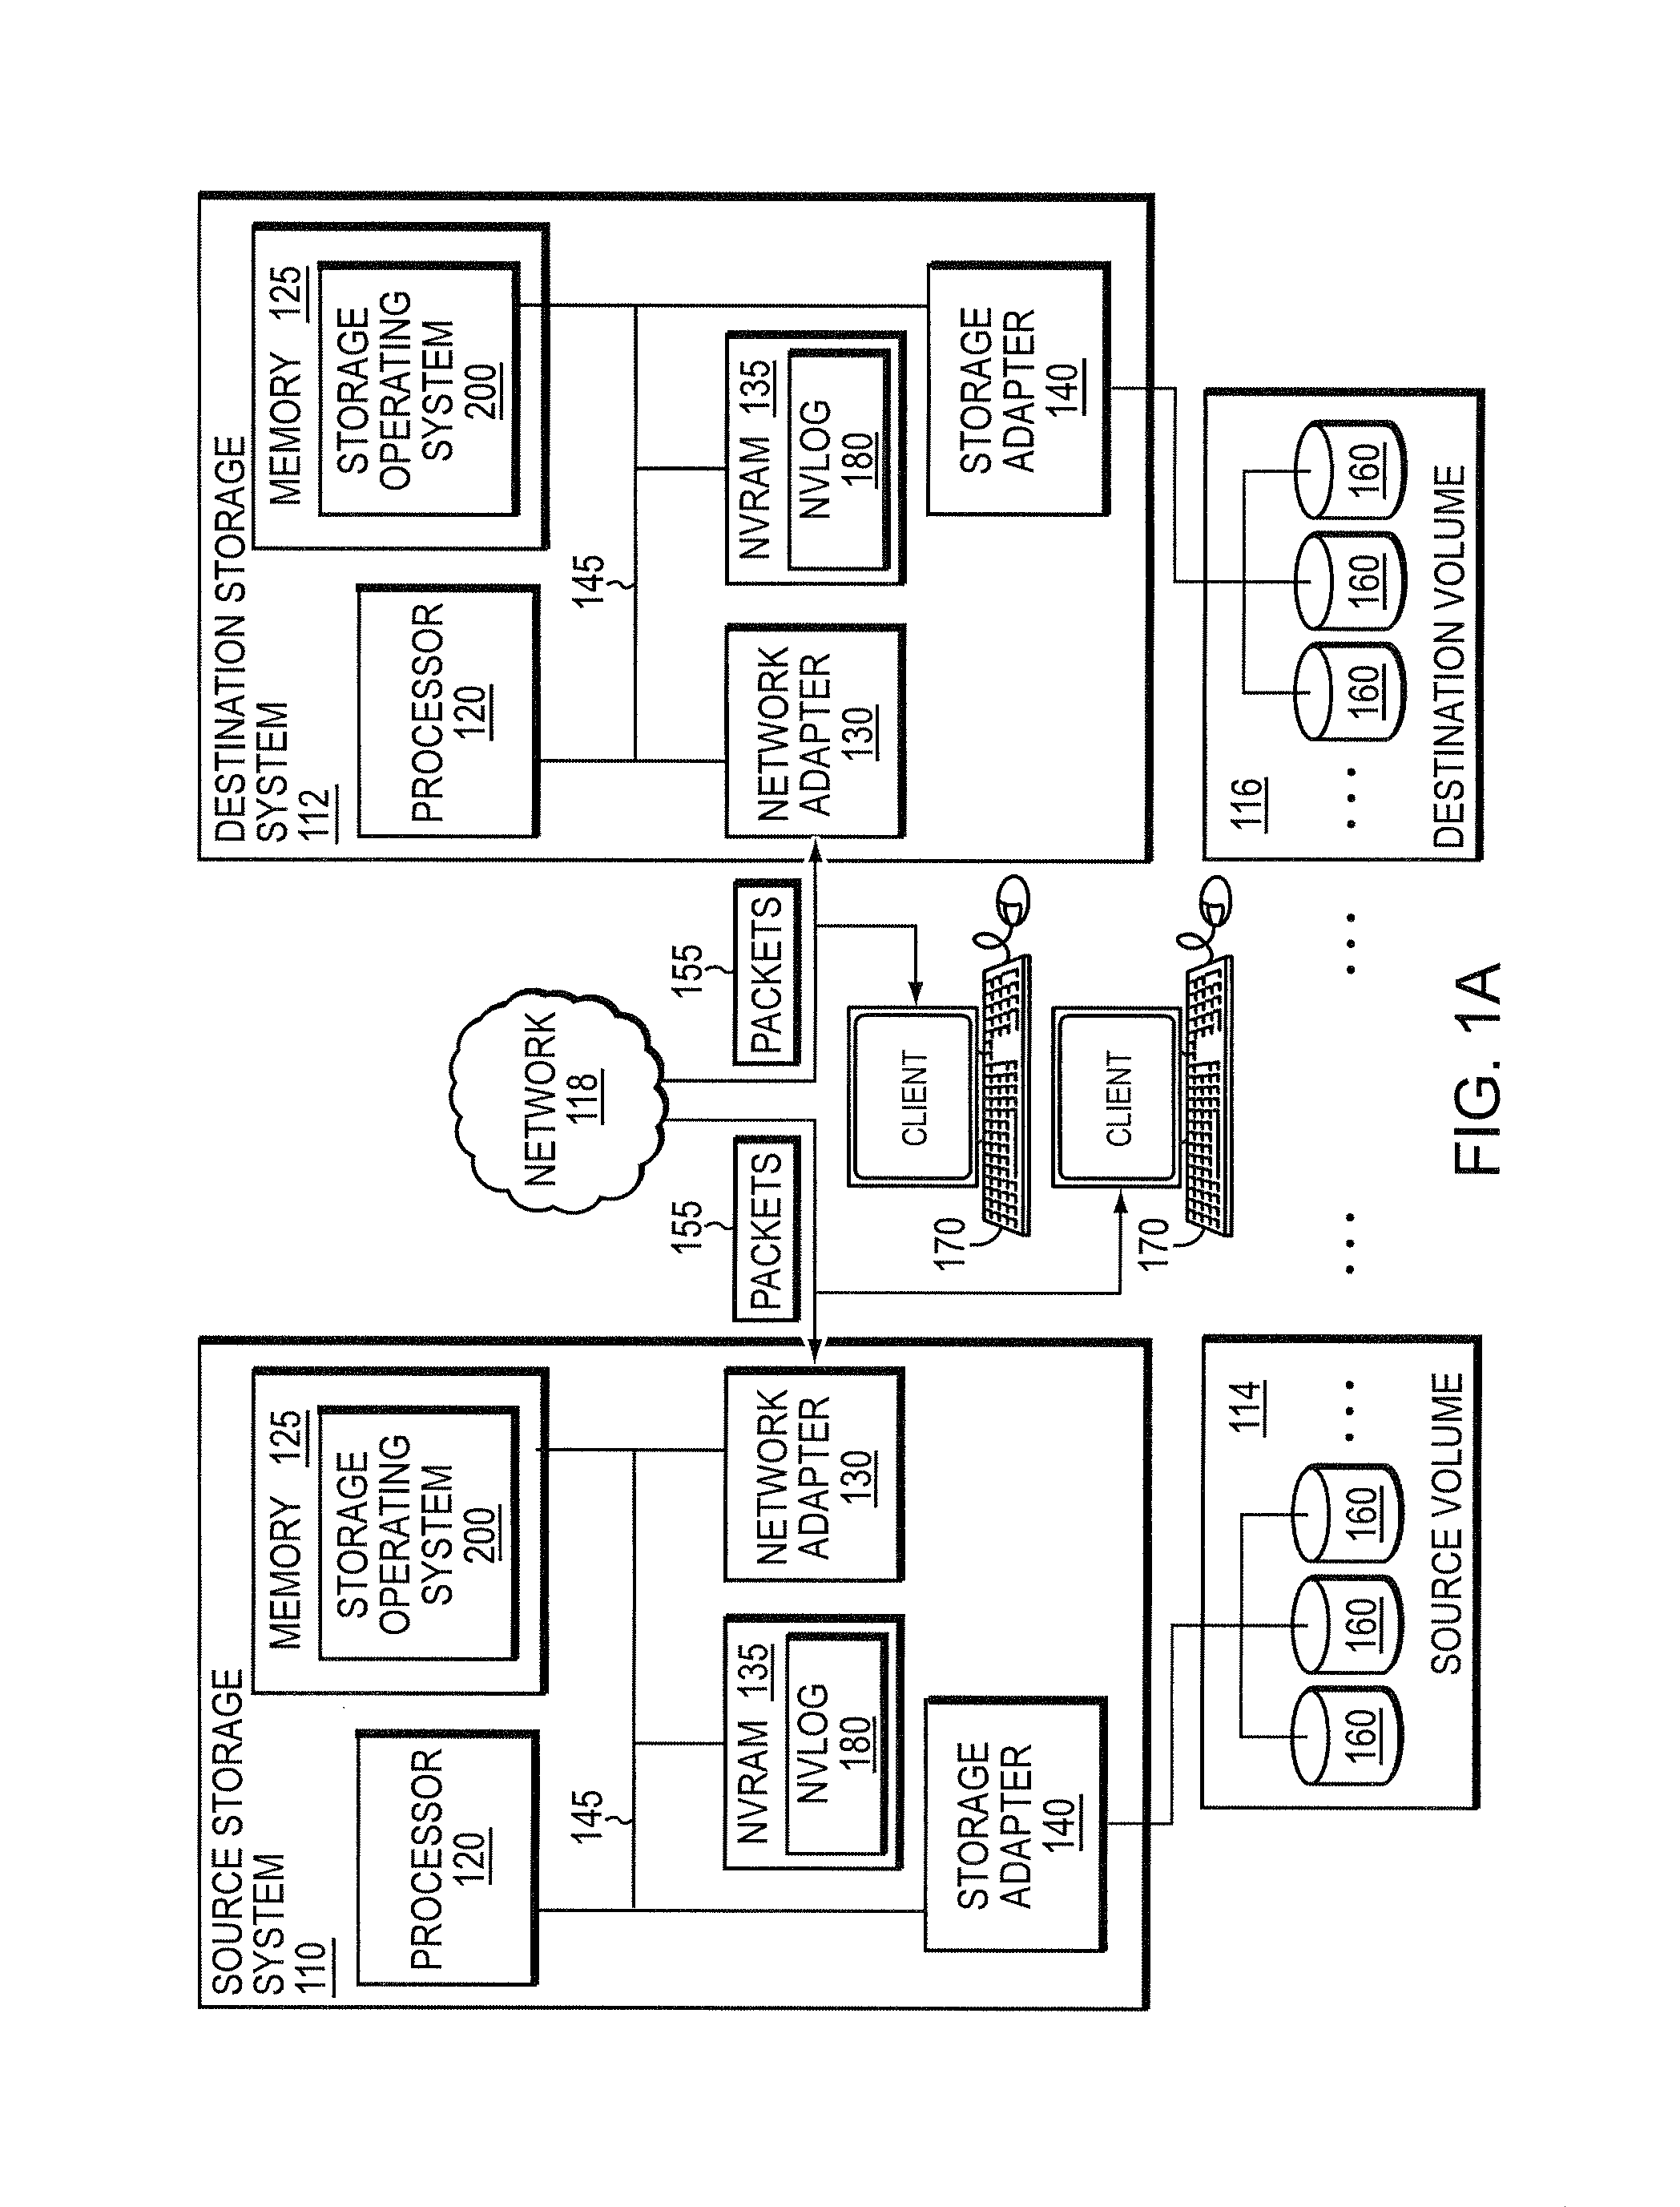 Application-controlled network packet classification